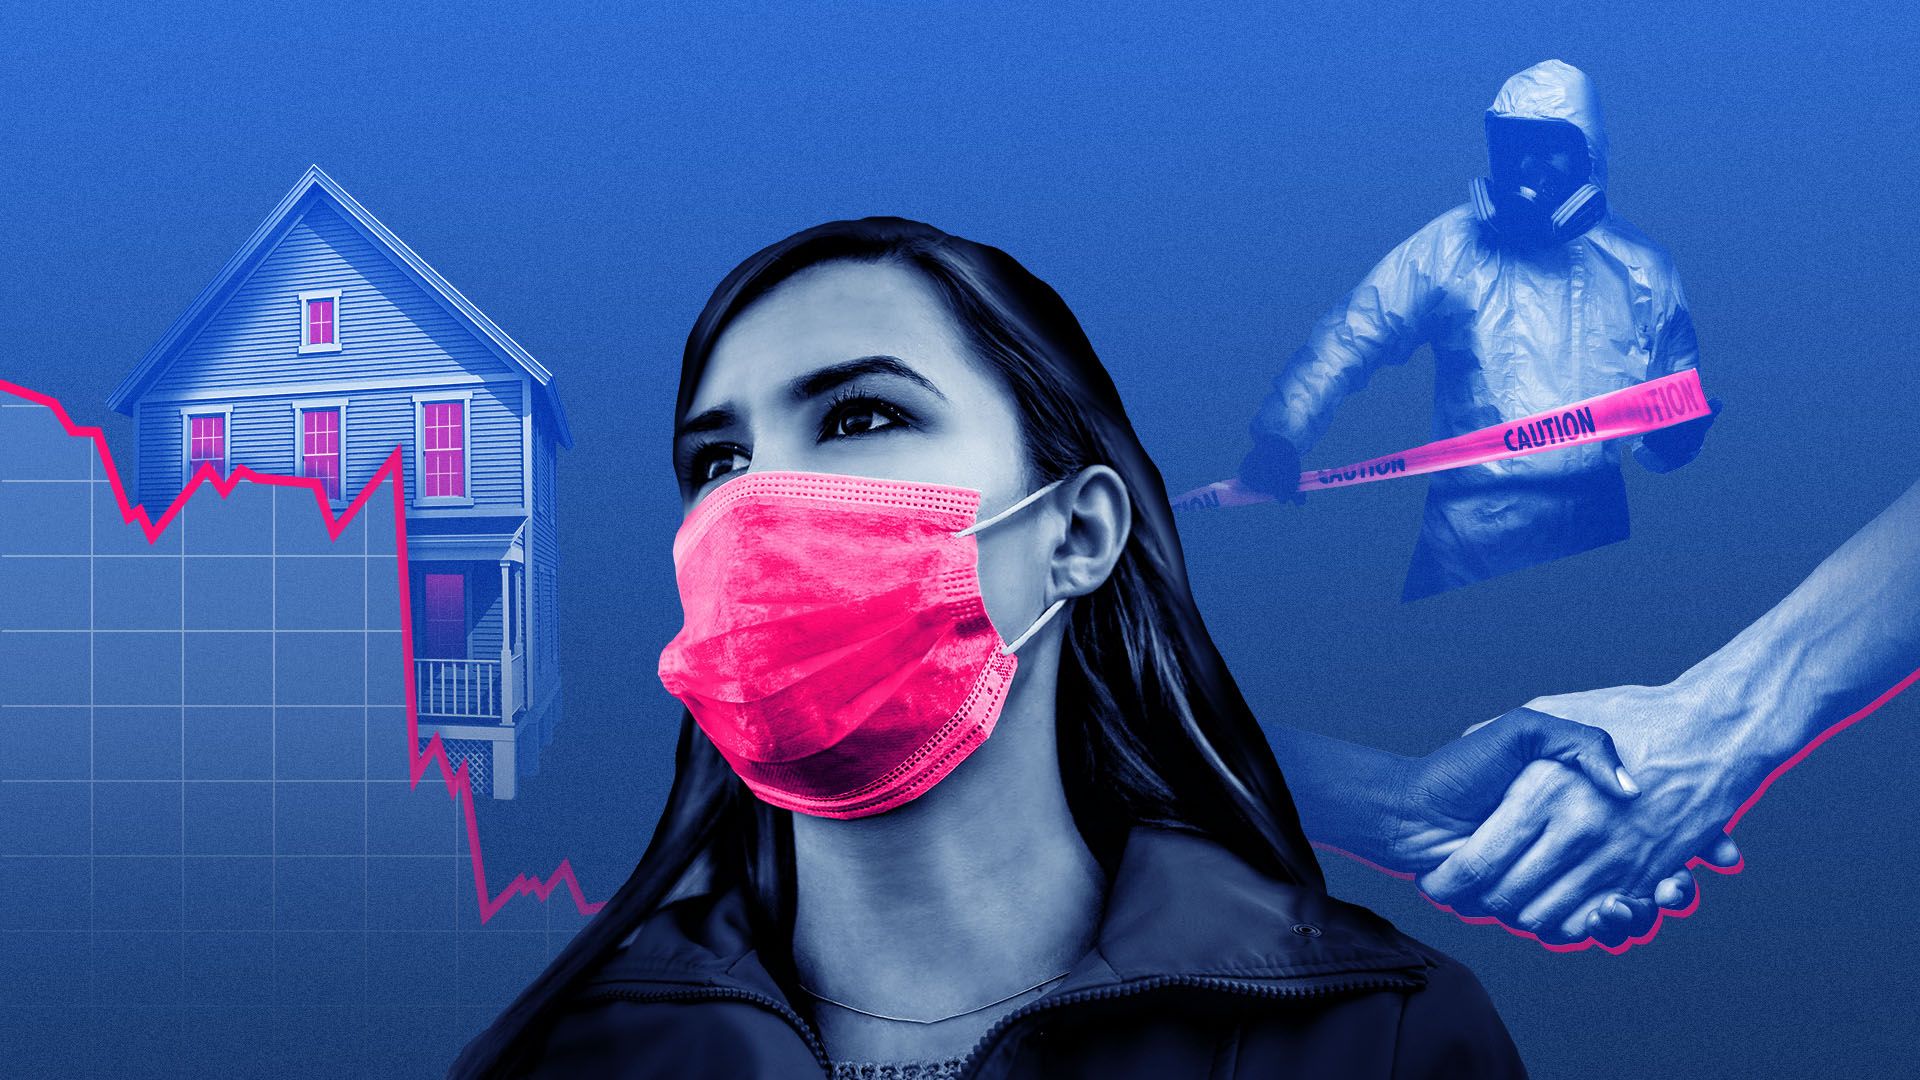 Illustration of a woman in a medical mask surrounded by a falling trend line, a house, a person in a hazmat suit with caution tape, and two hands shaking